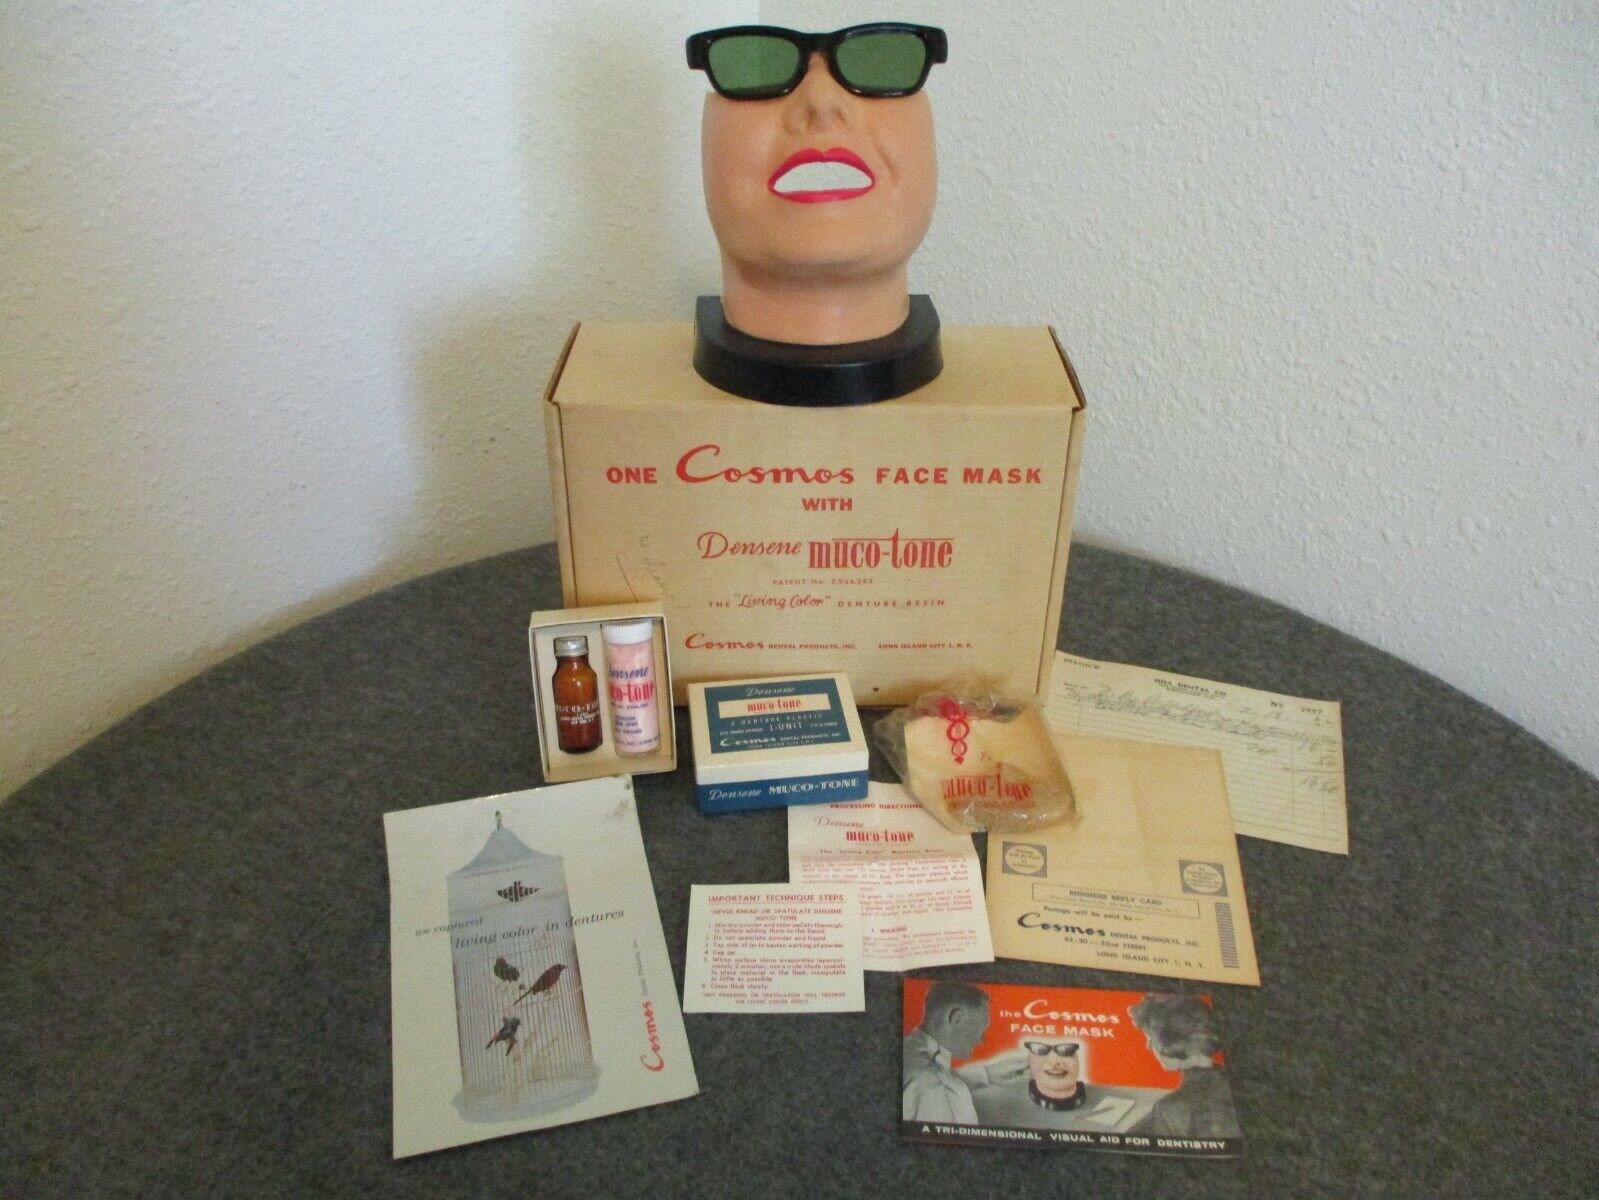 VINTAGE 1962 DENTAL DISPLAY MODEL COSMOS FACE/BUST VISUAL AID FOR DENTISTRY